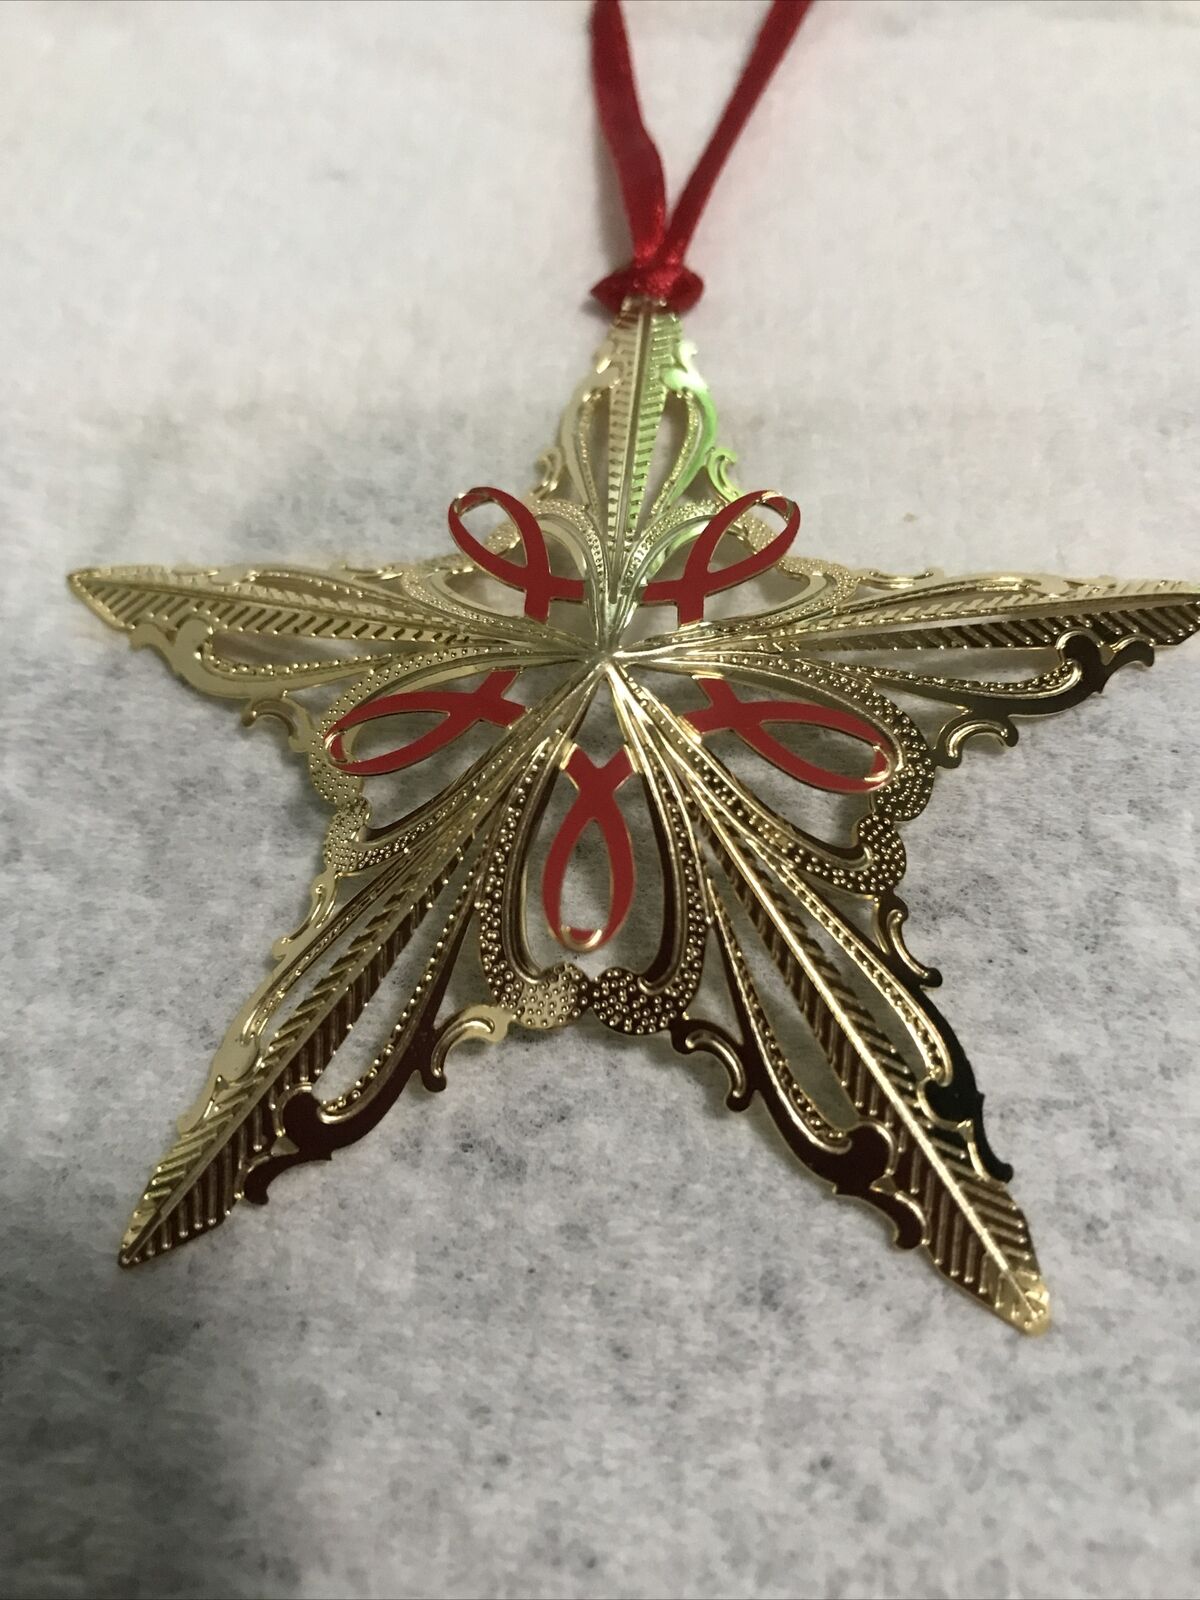 Brass/gold collectors edition ornament millennium star of hope symbol HIV/AIDS